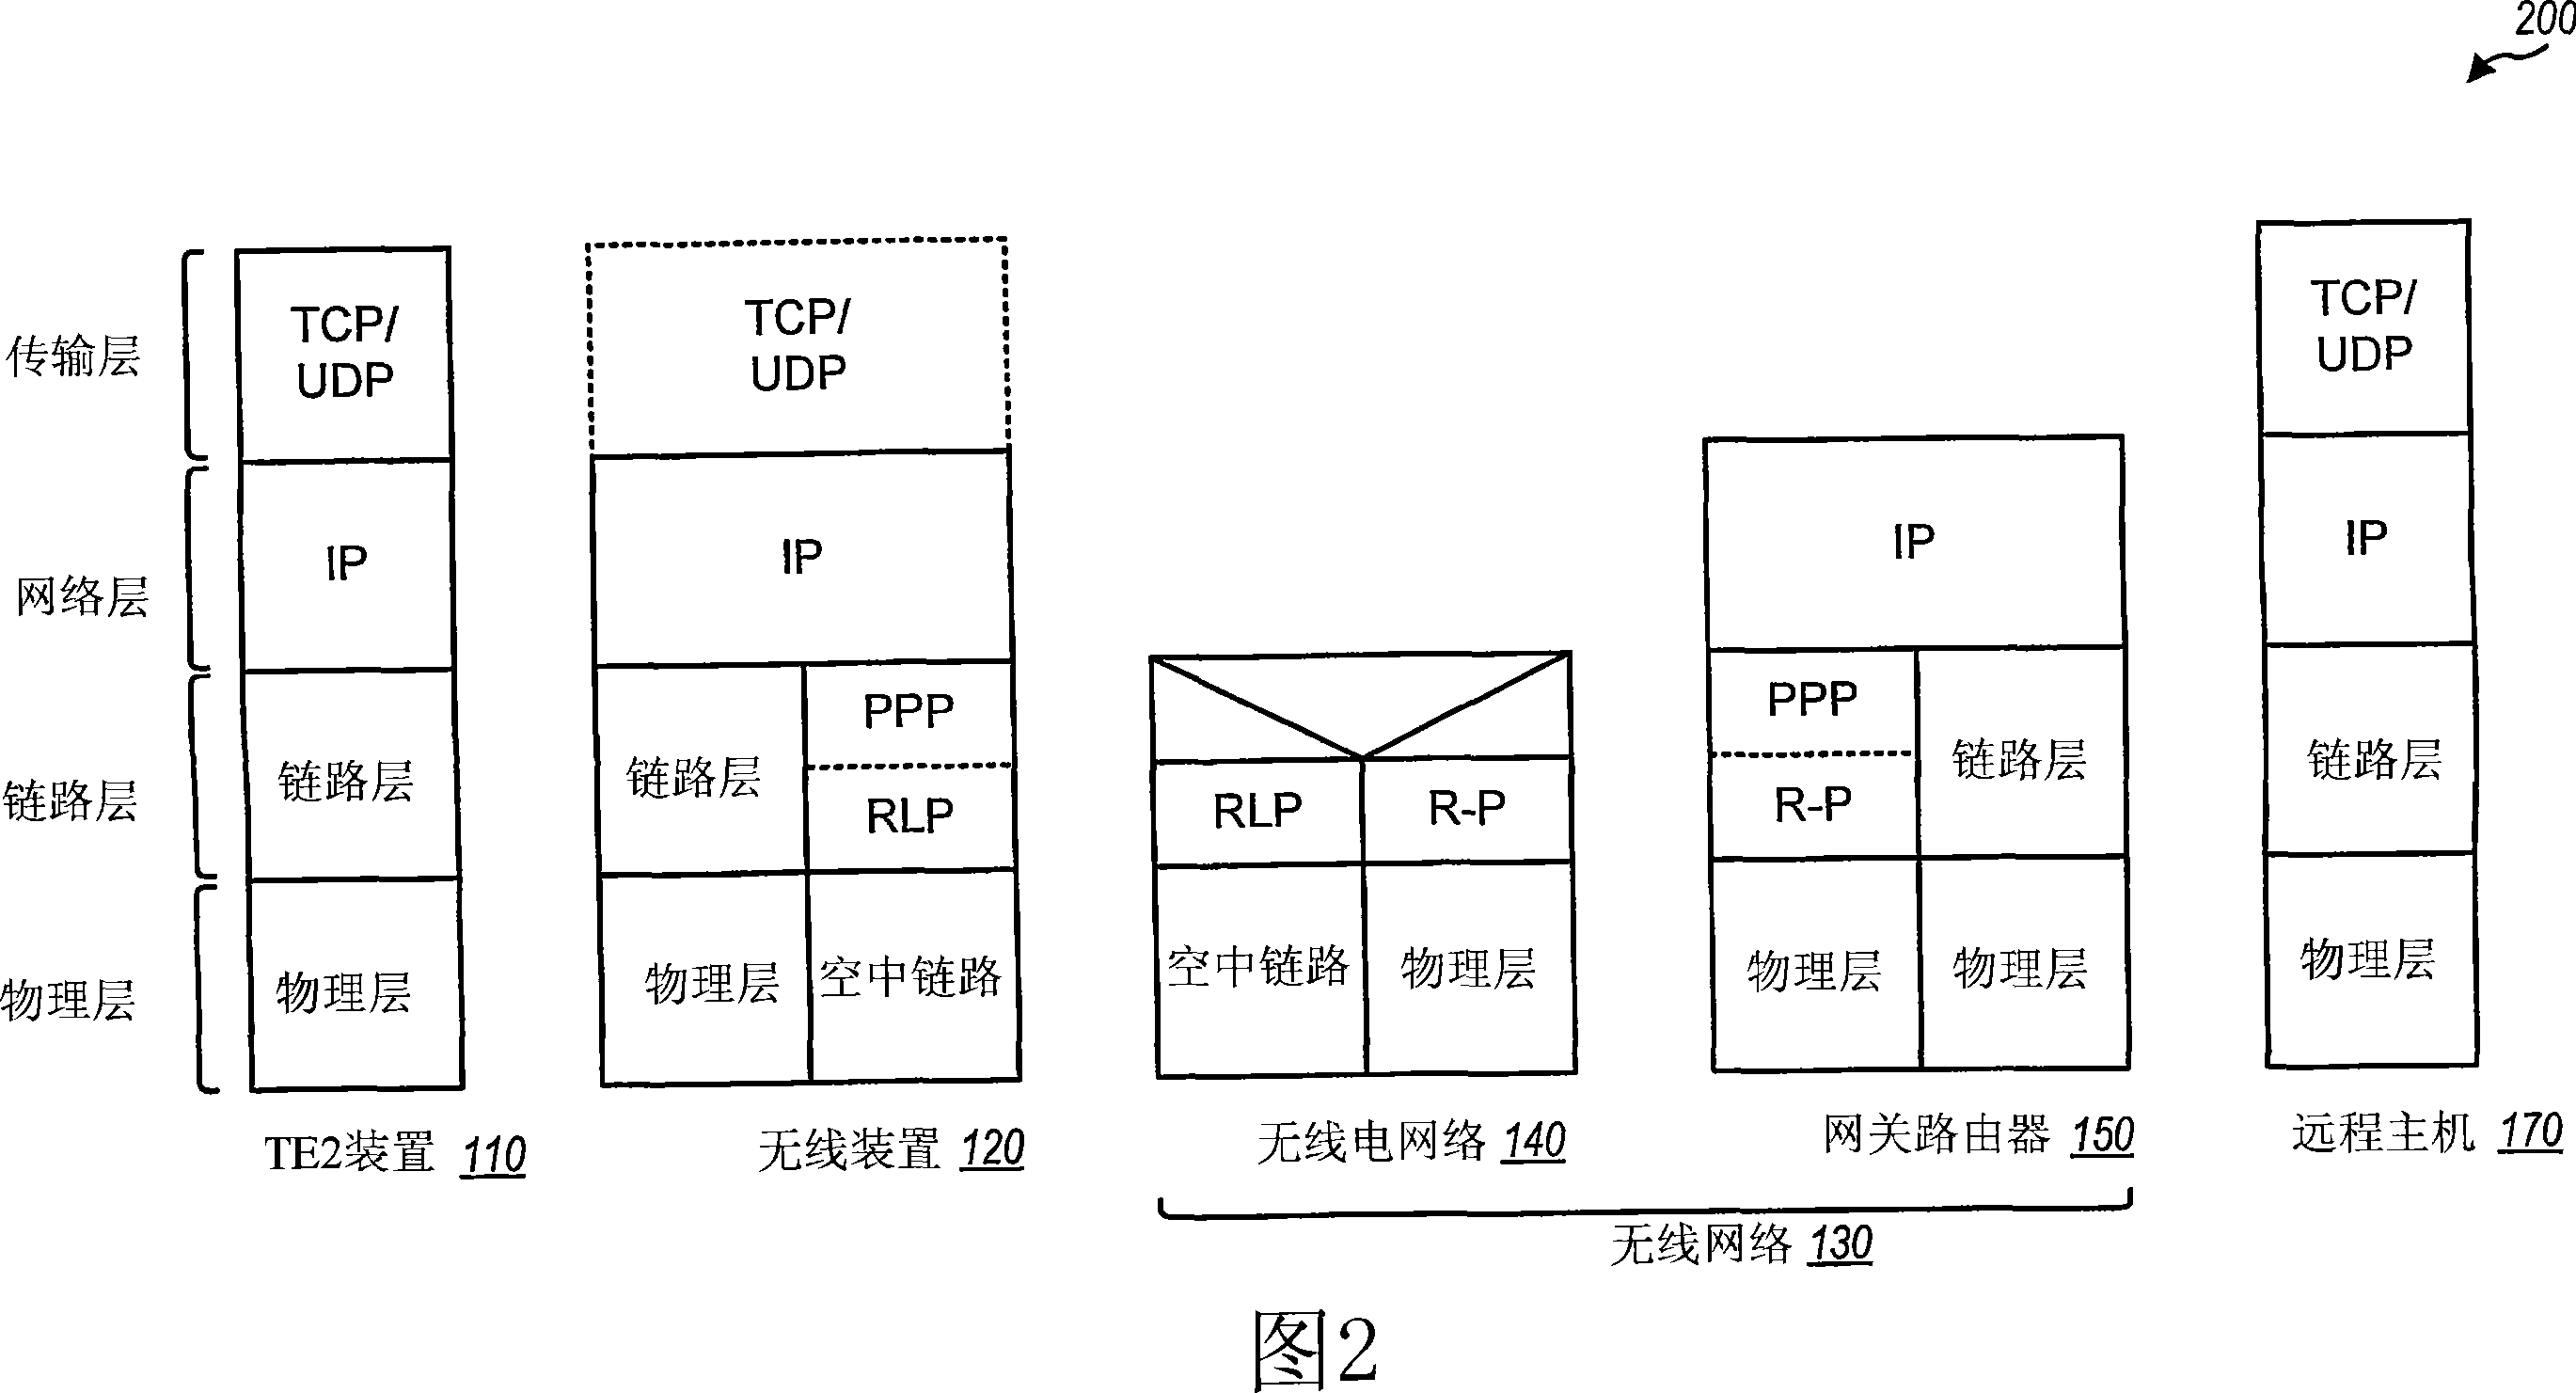 Method and apparatus for supporting wireless data services on a TE2 device using an IP-based interface